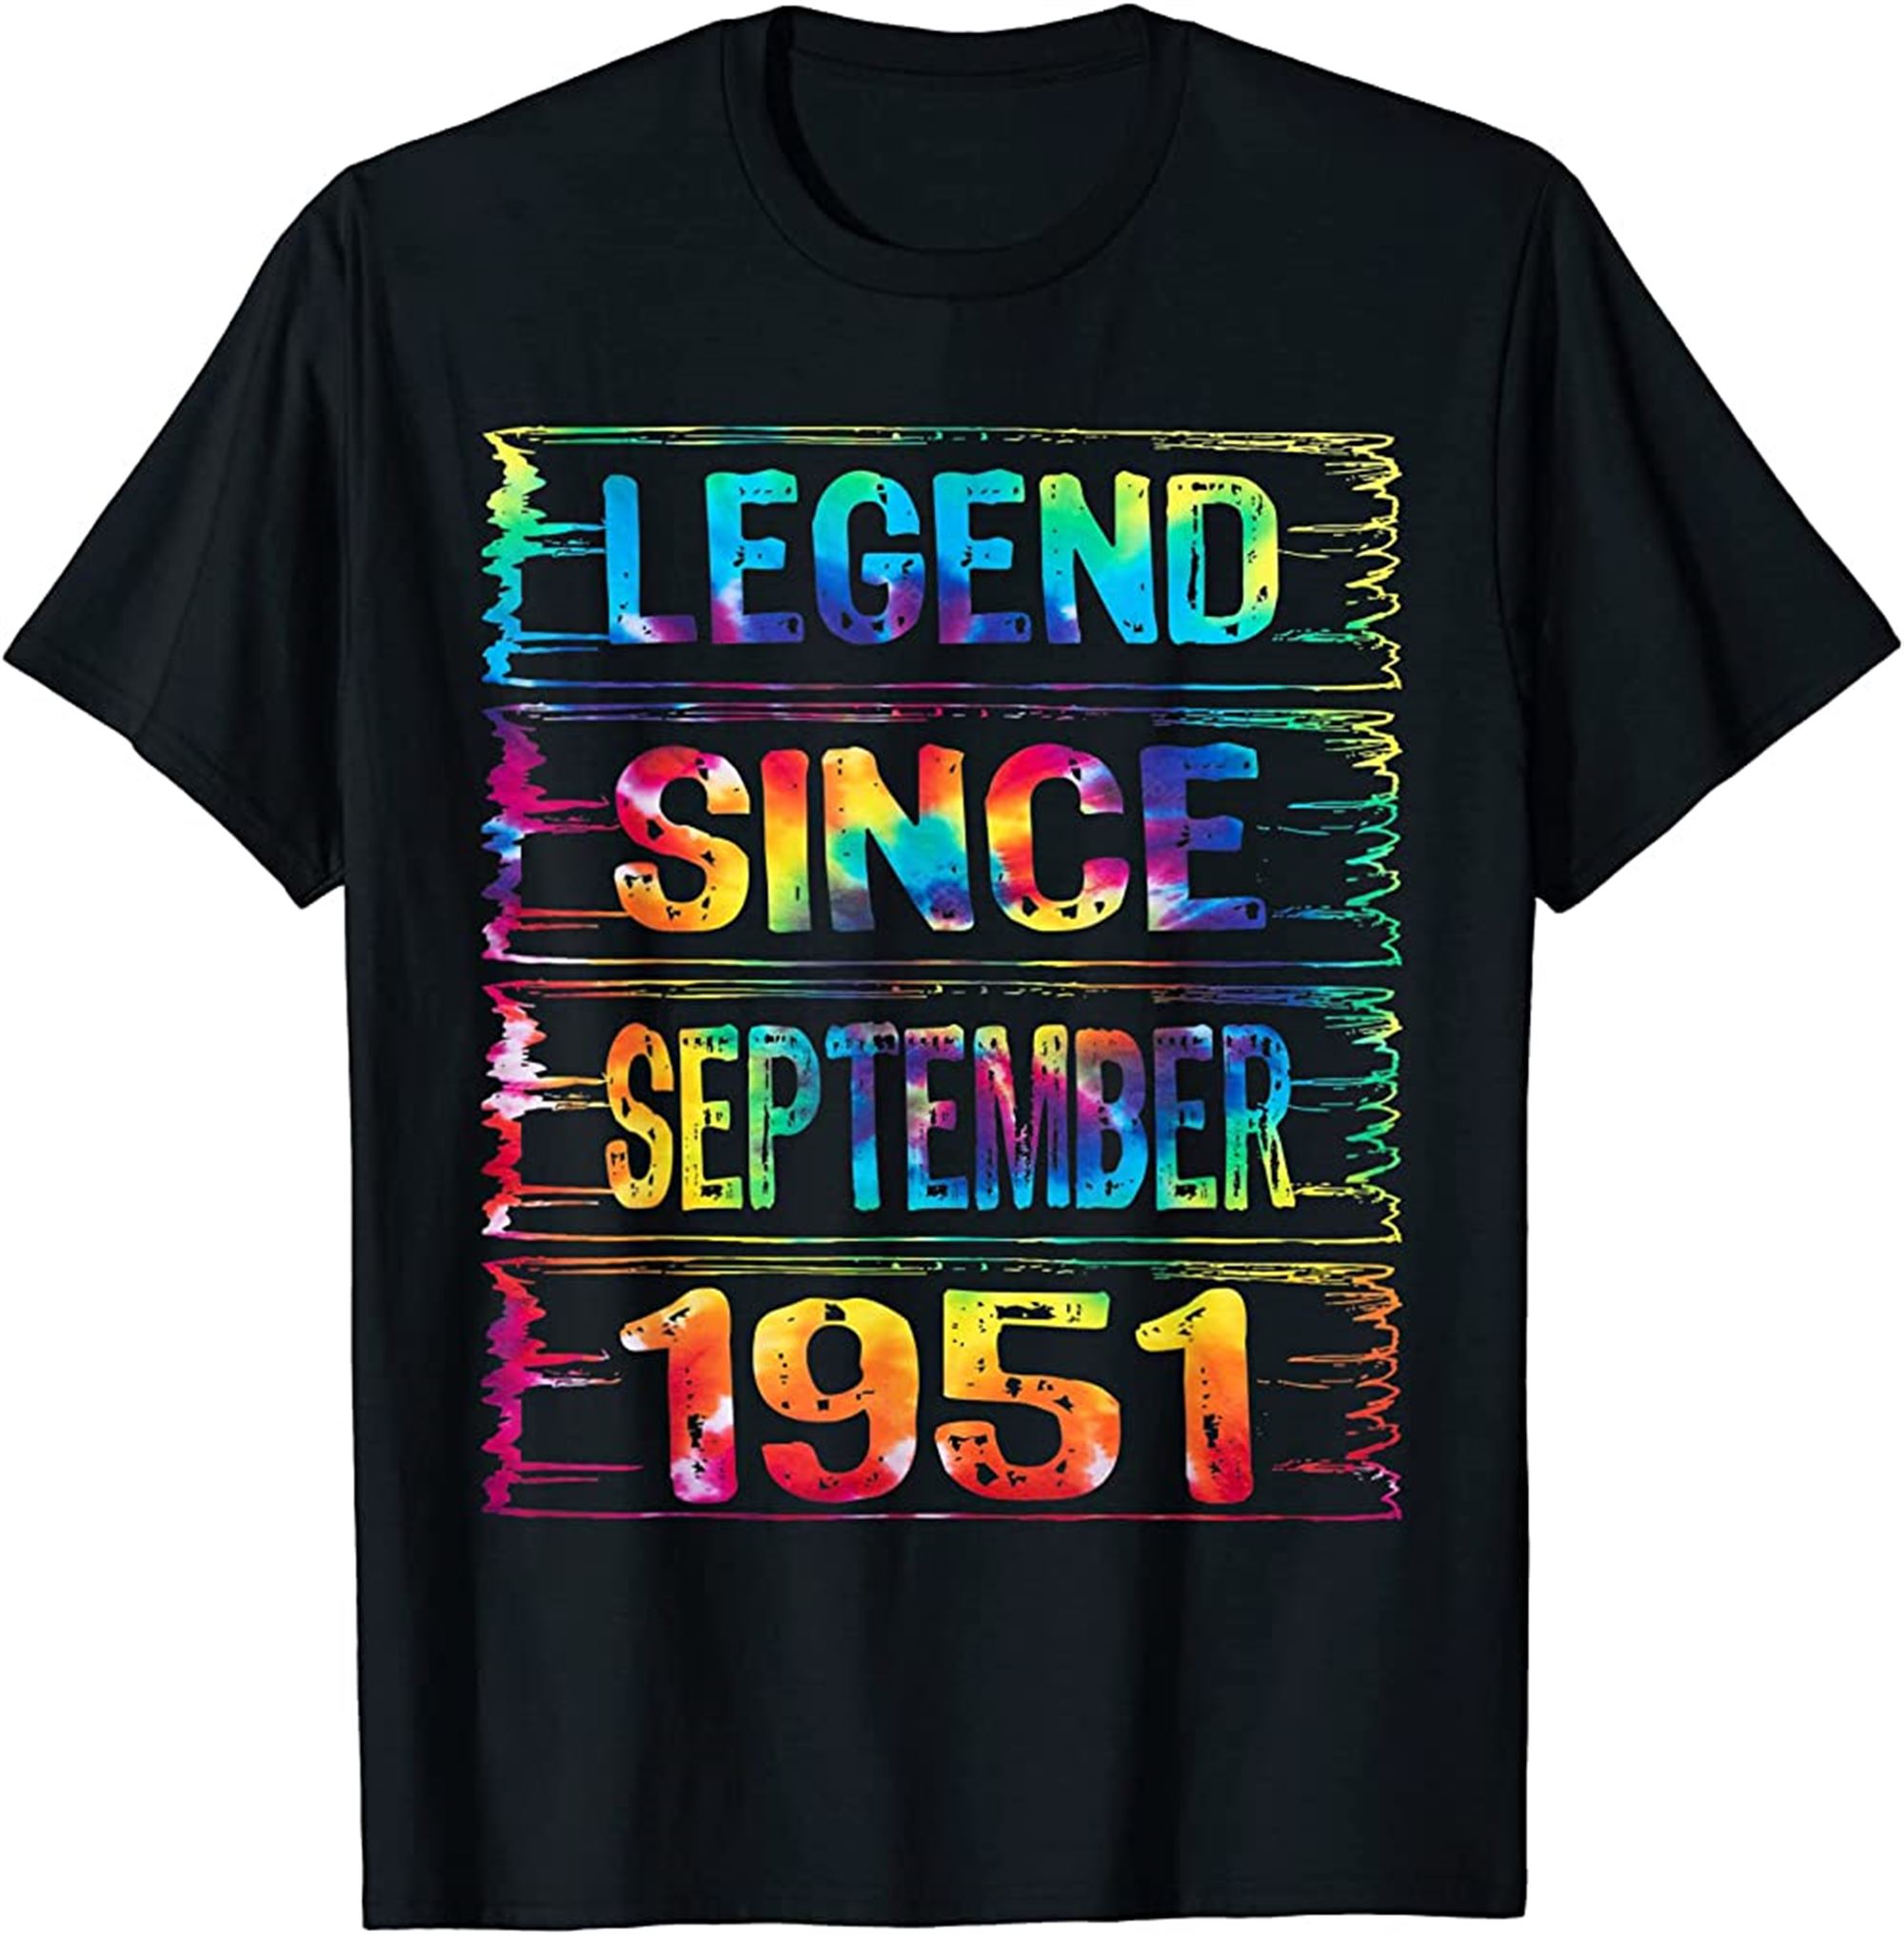 September 71 Year Old Since 1951 71st Birthday Gift Tie Dye T-shirt Full Size Up To 5xl